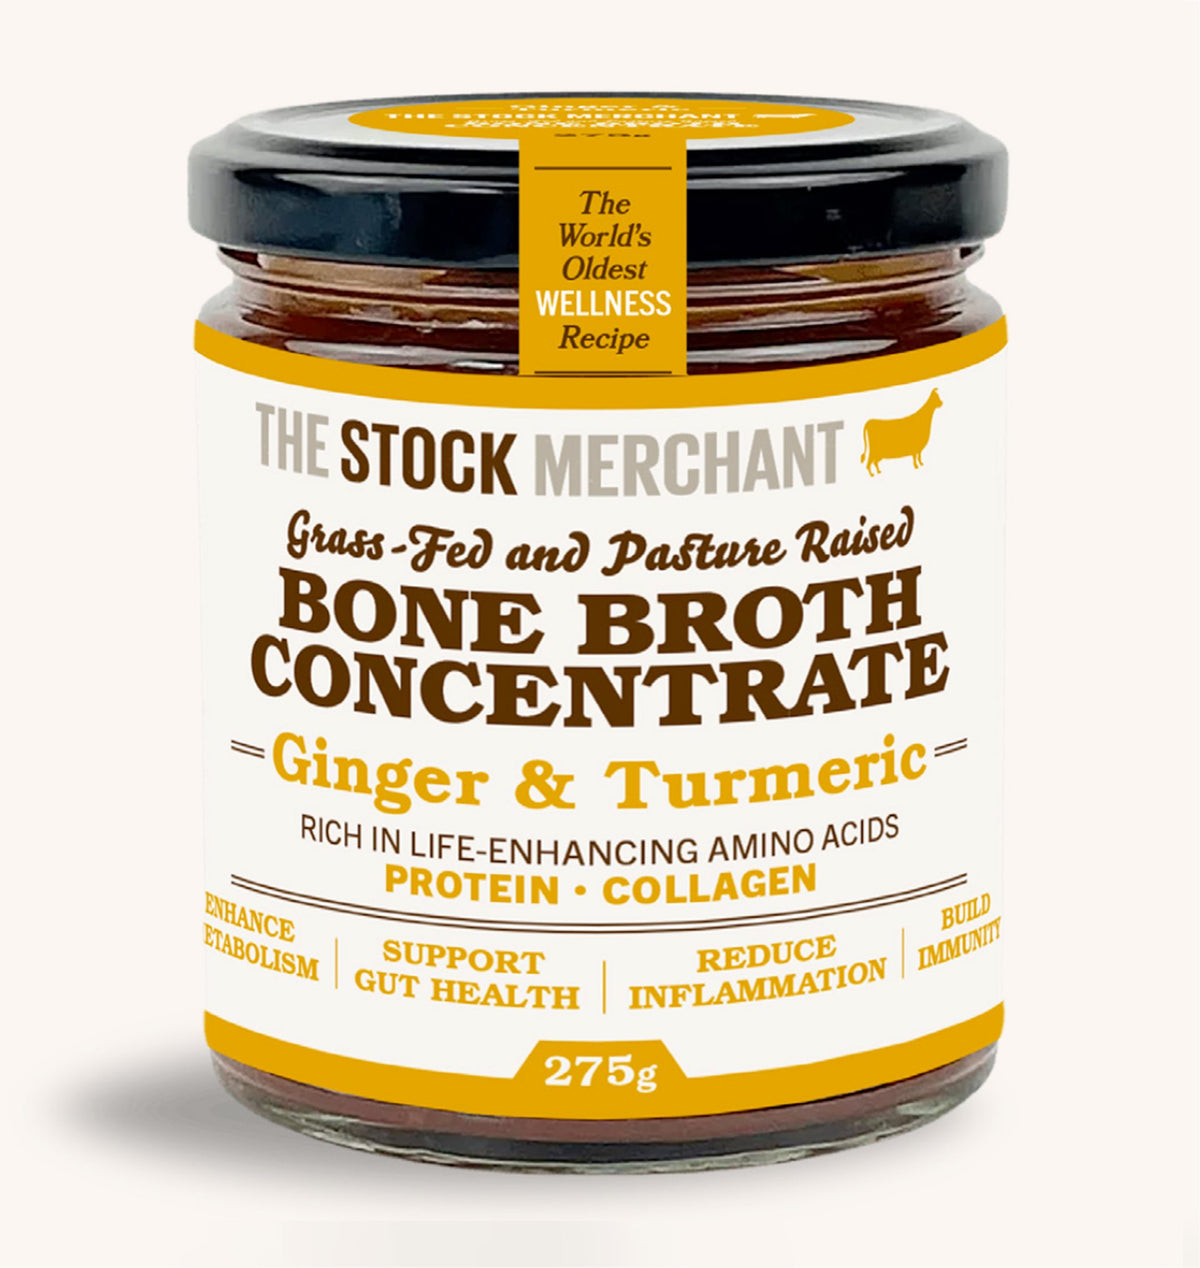 The Stock Merchant Bone Broth Concentrate Ginger & Turmeric